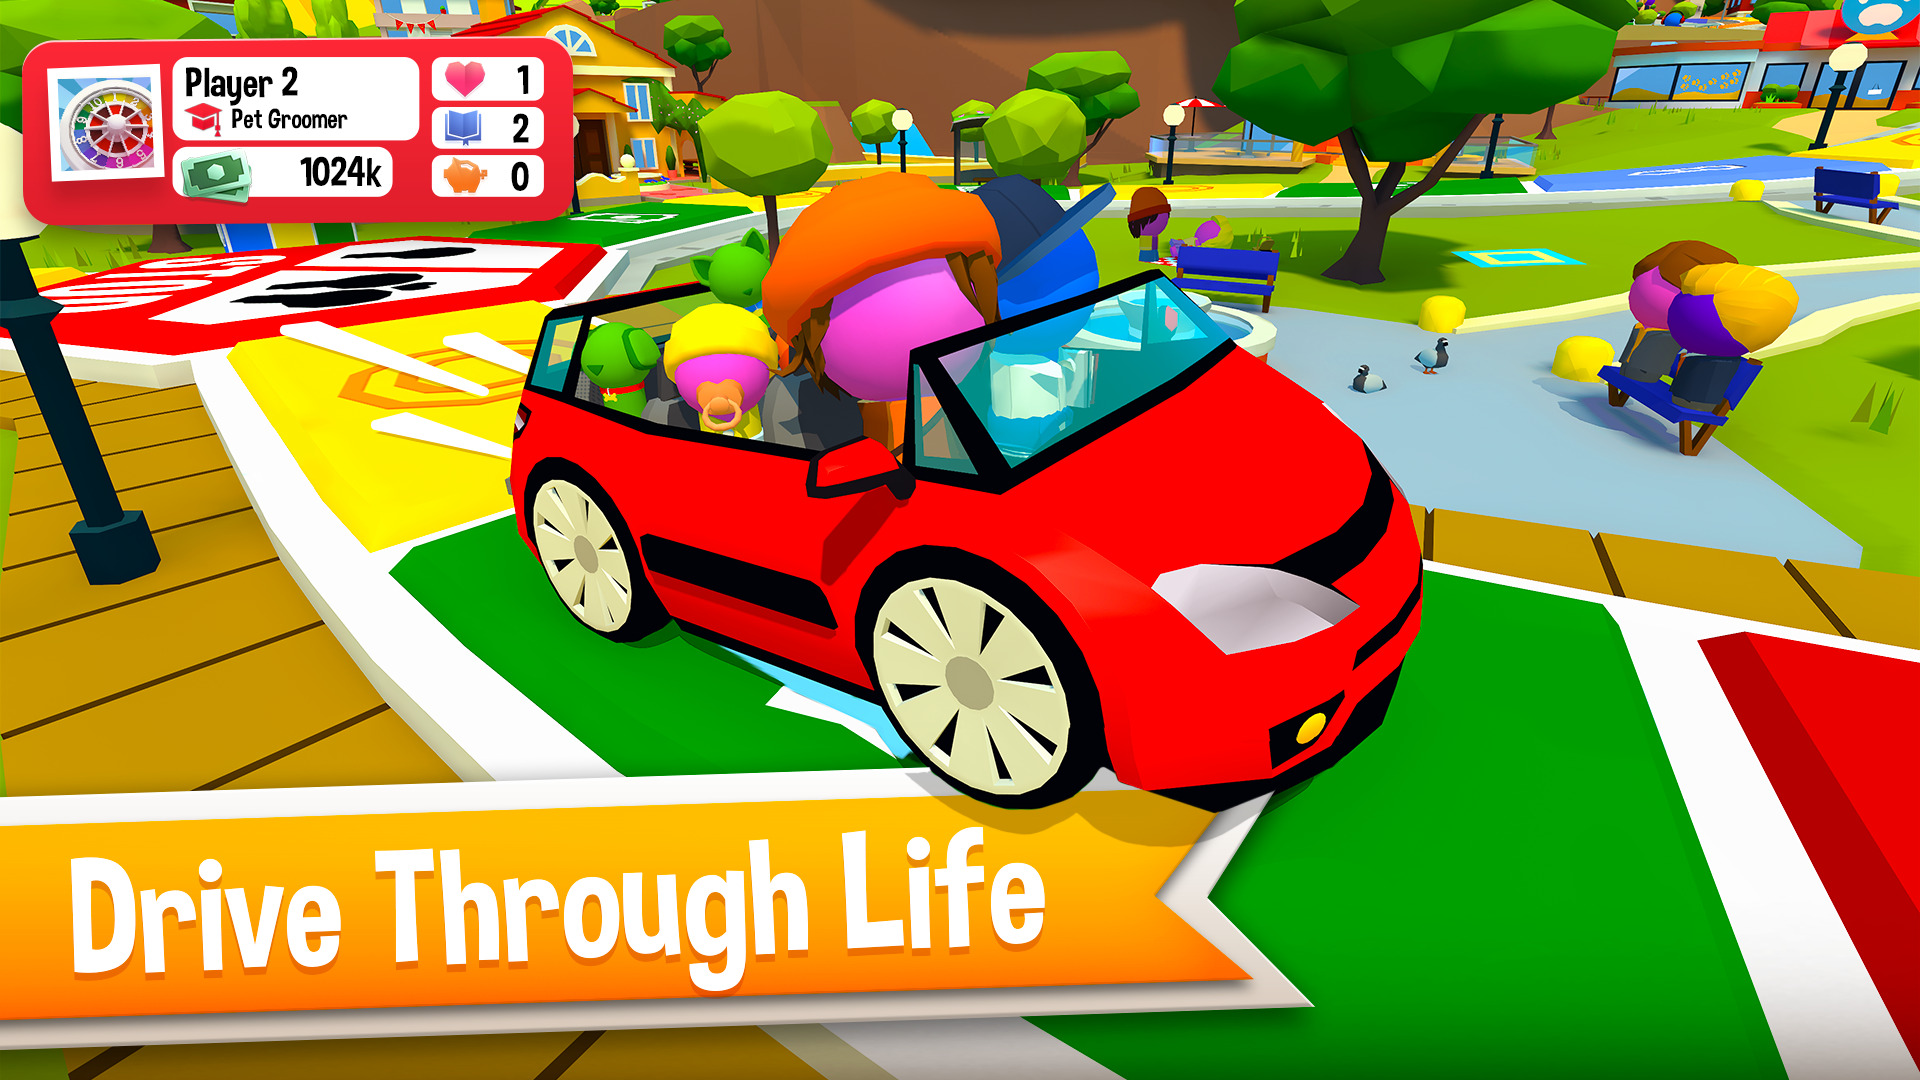 The Game of Life - Apps on Google Play